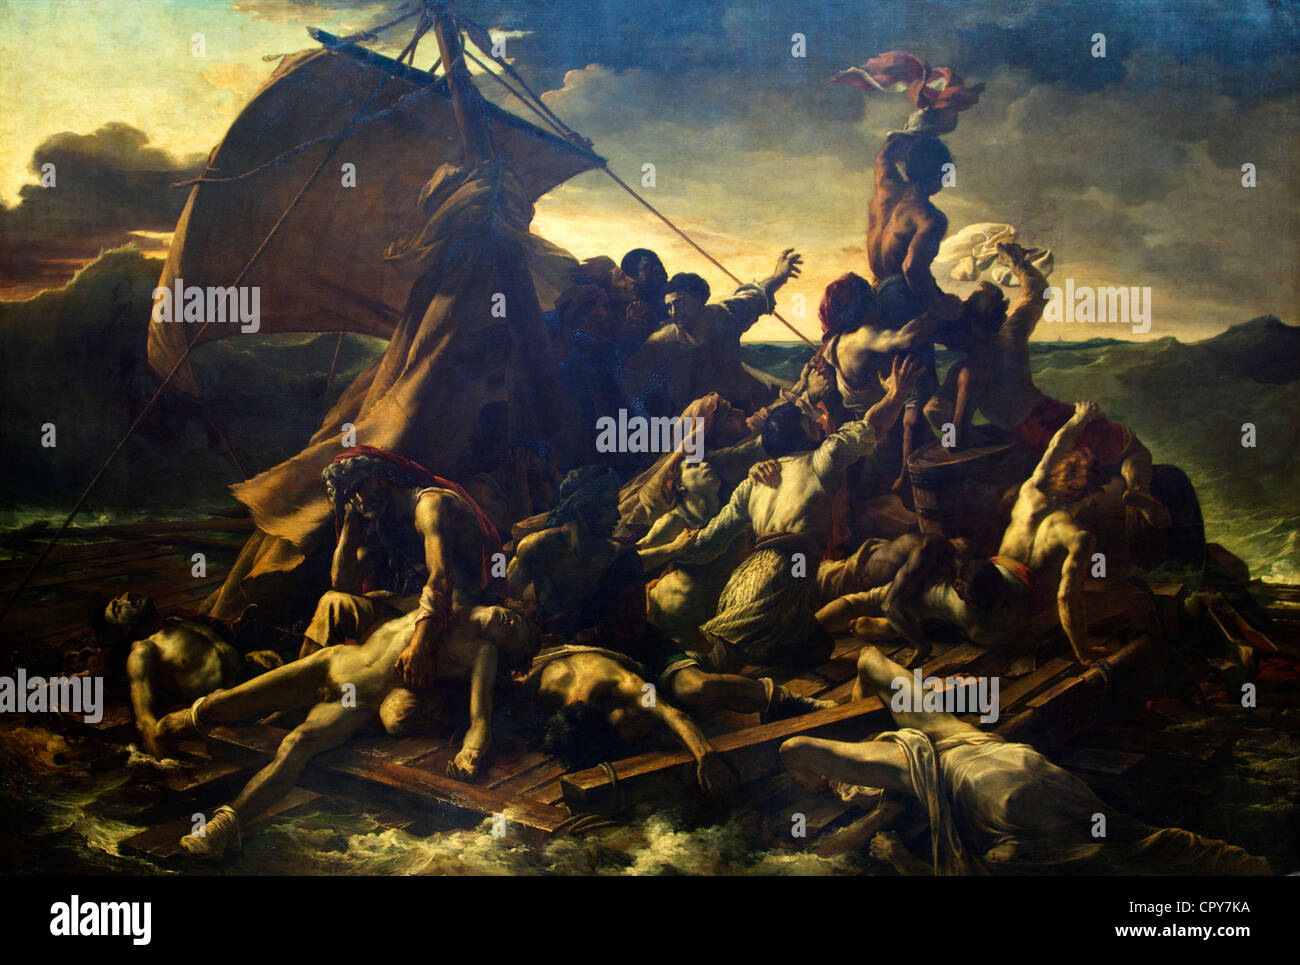 The Raft of the Medusa, by Theodore Gericault, 1818-19, Musee du Louvre Museum, Paris, France, Europe Stock Photo